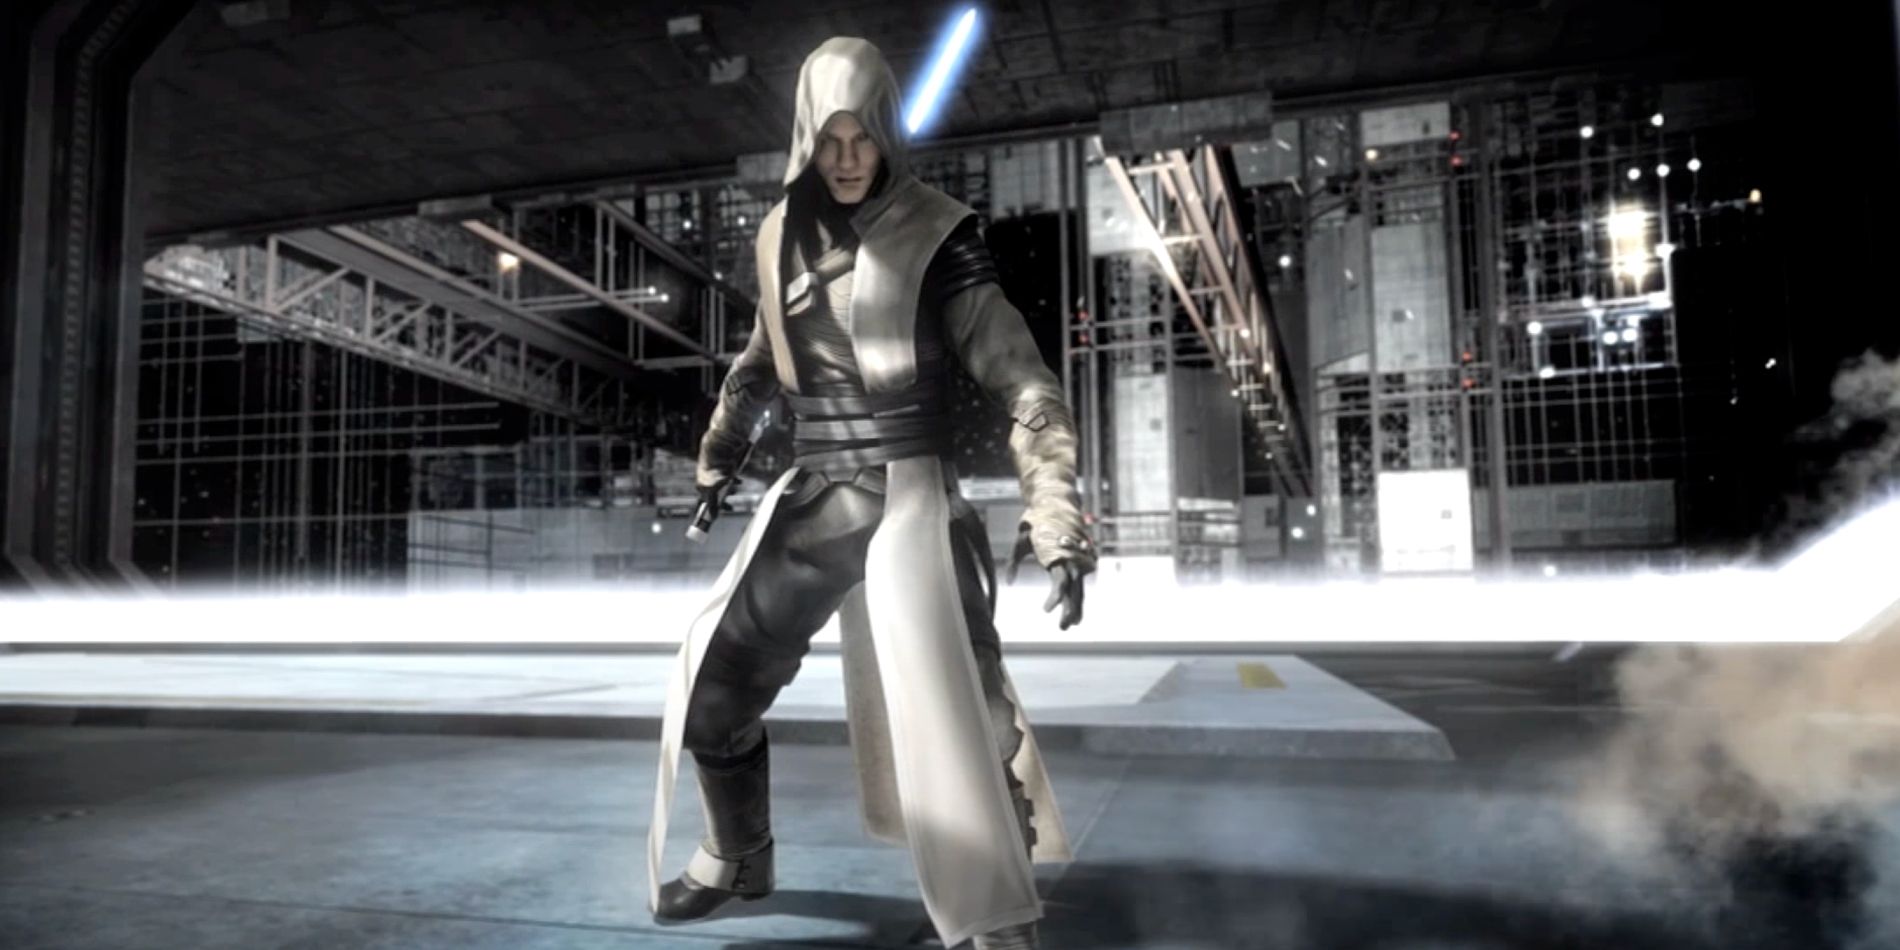 Star Wars Force Unleashed Every Holocron Location in The Death Star Opening Cutscene